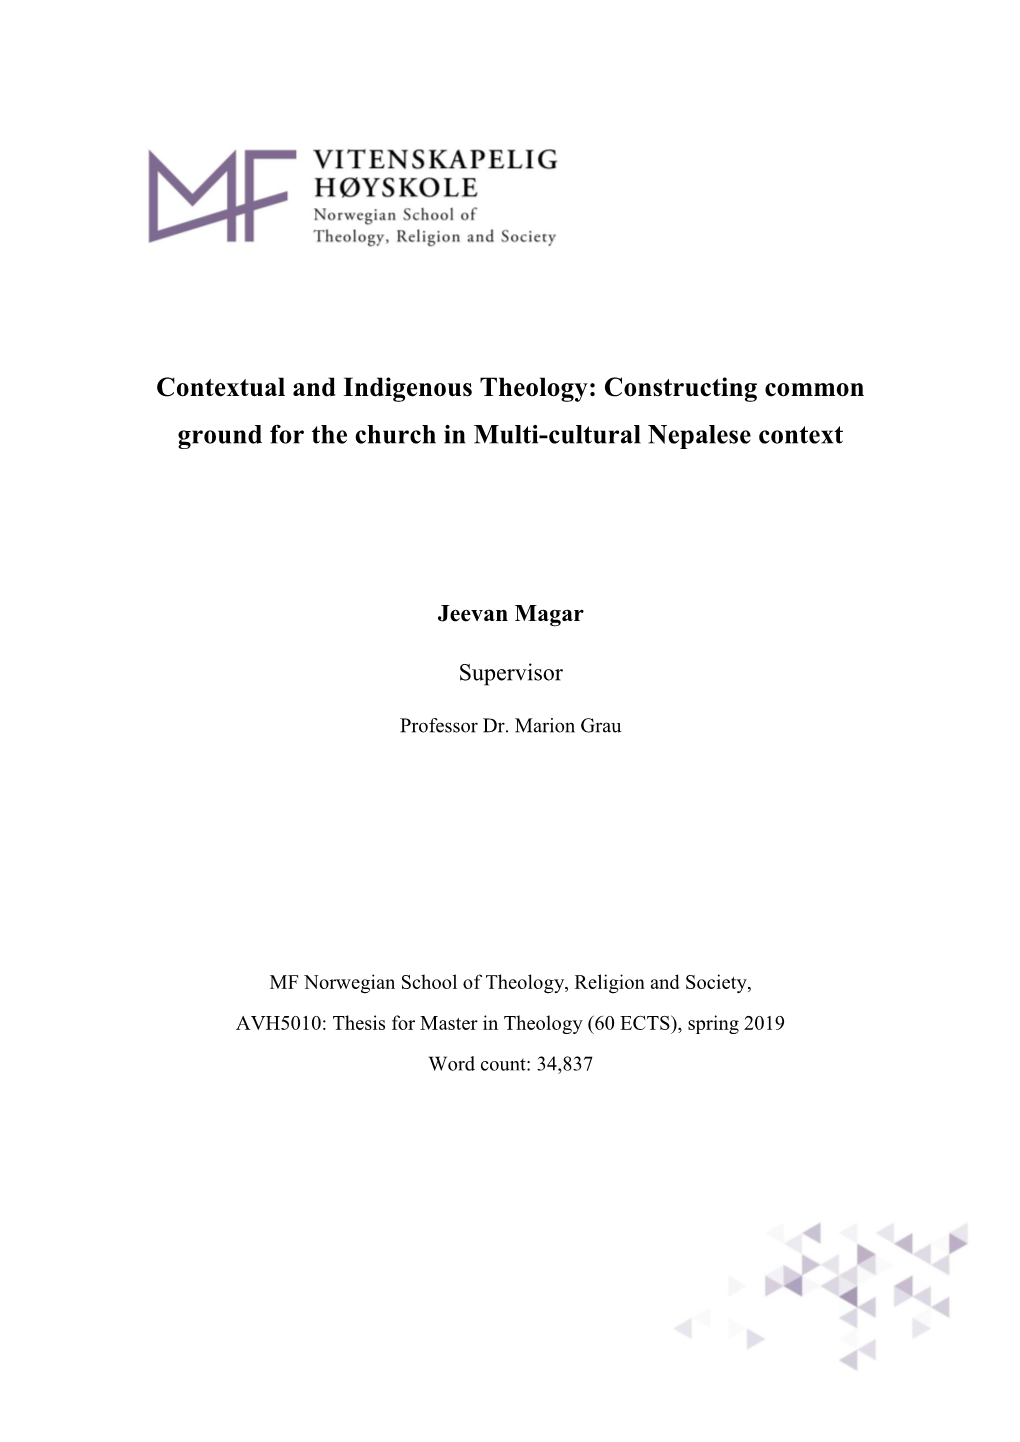 Contextual and Indigenous Theology: Constructing Common Ground for the Church in Multi-Cultural Nepalese Context